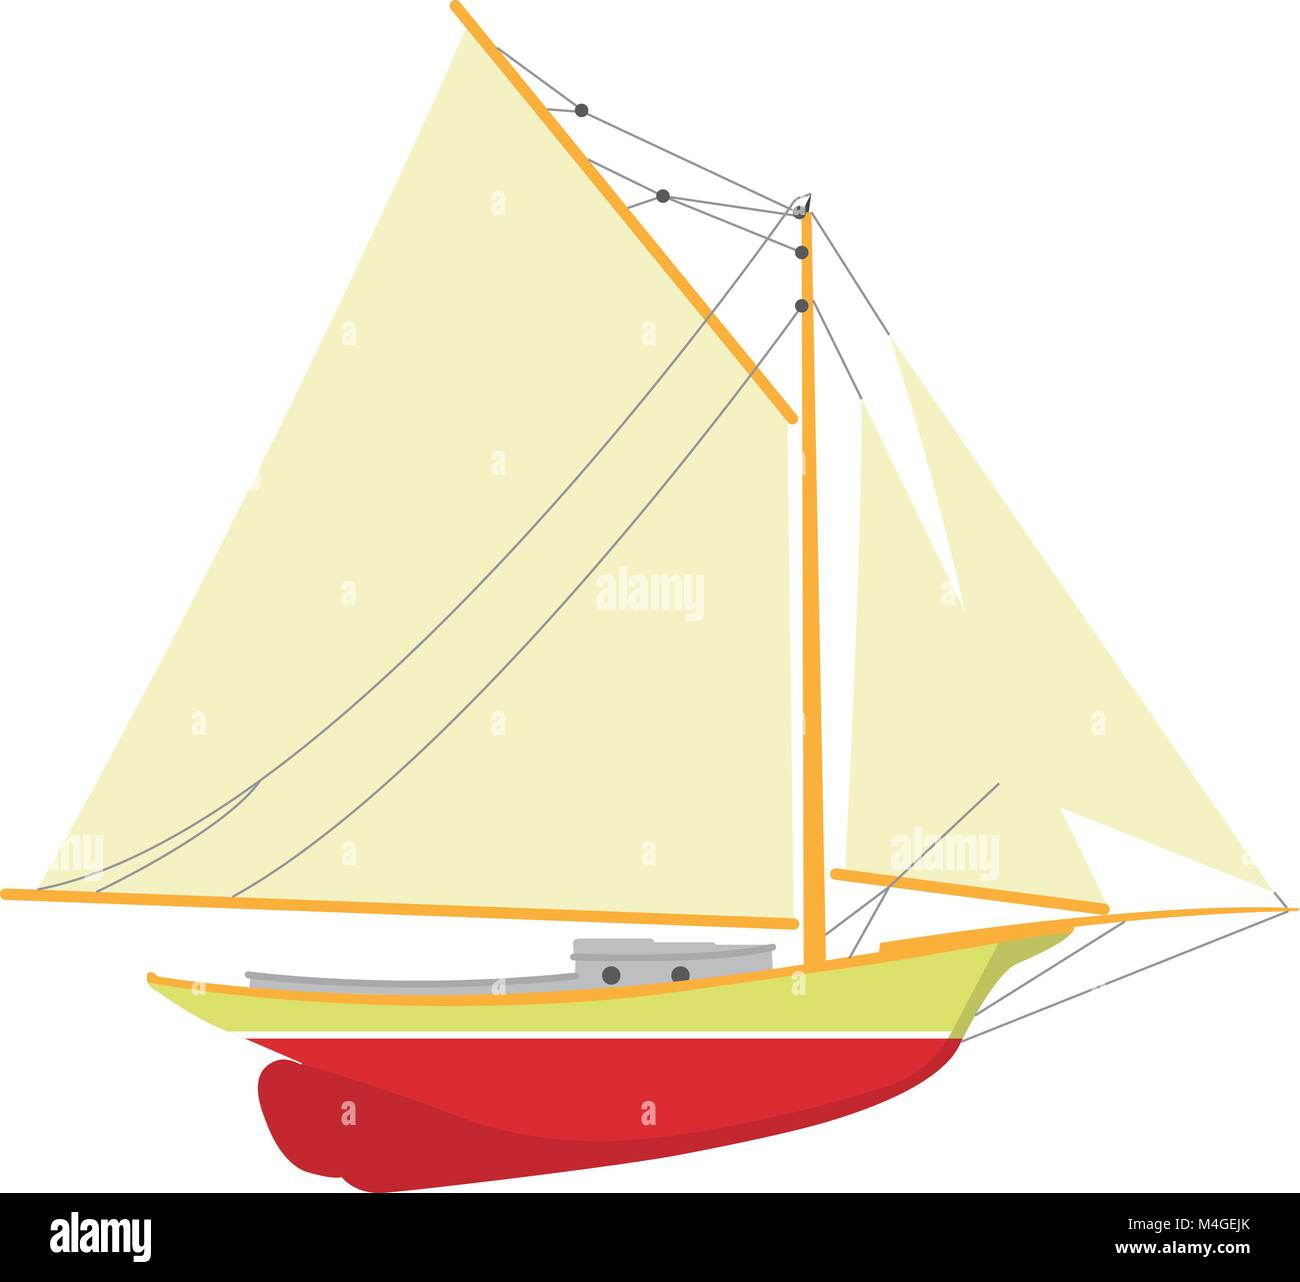 Sailboat or yacht side view - sailer out of water Stock Vector